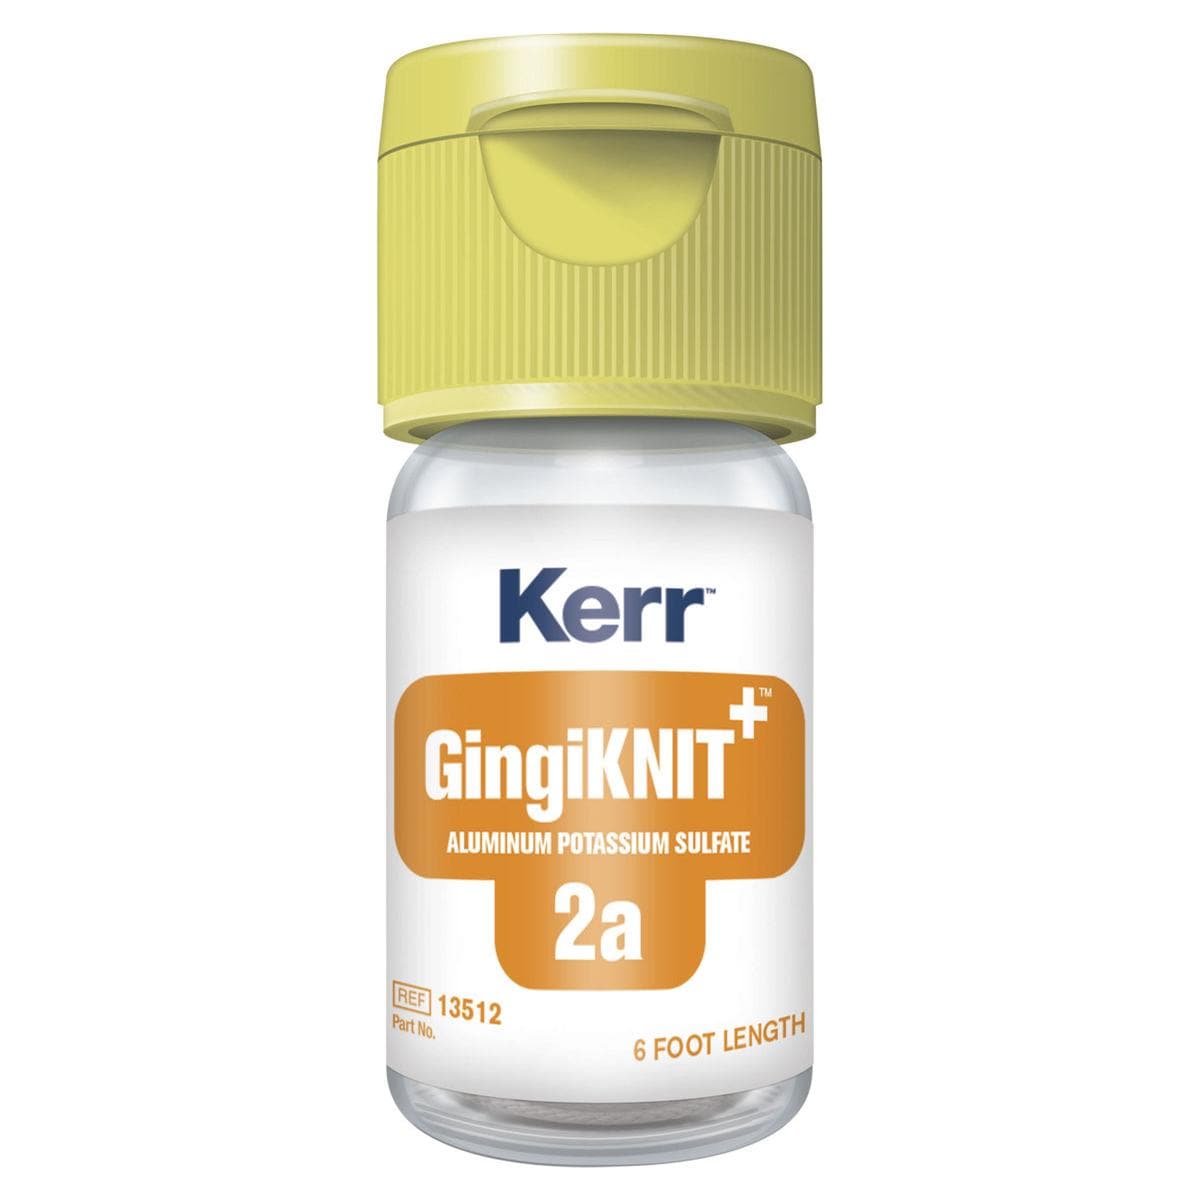 GingKnit+? - non imprgn - 2a